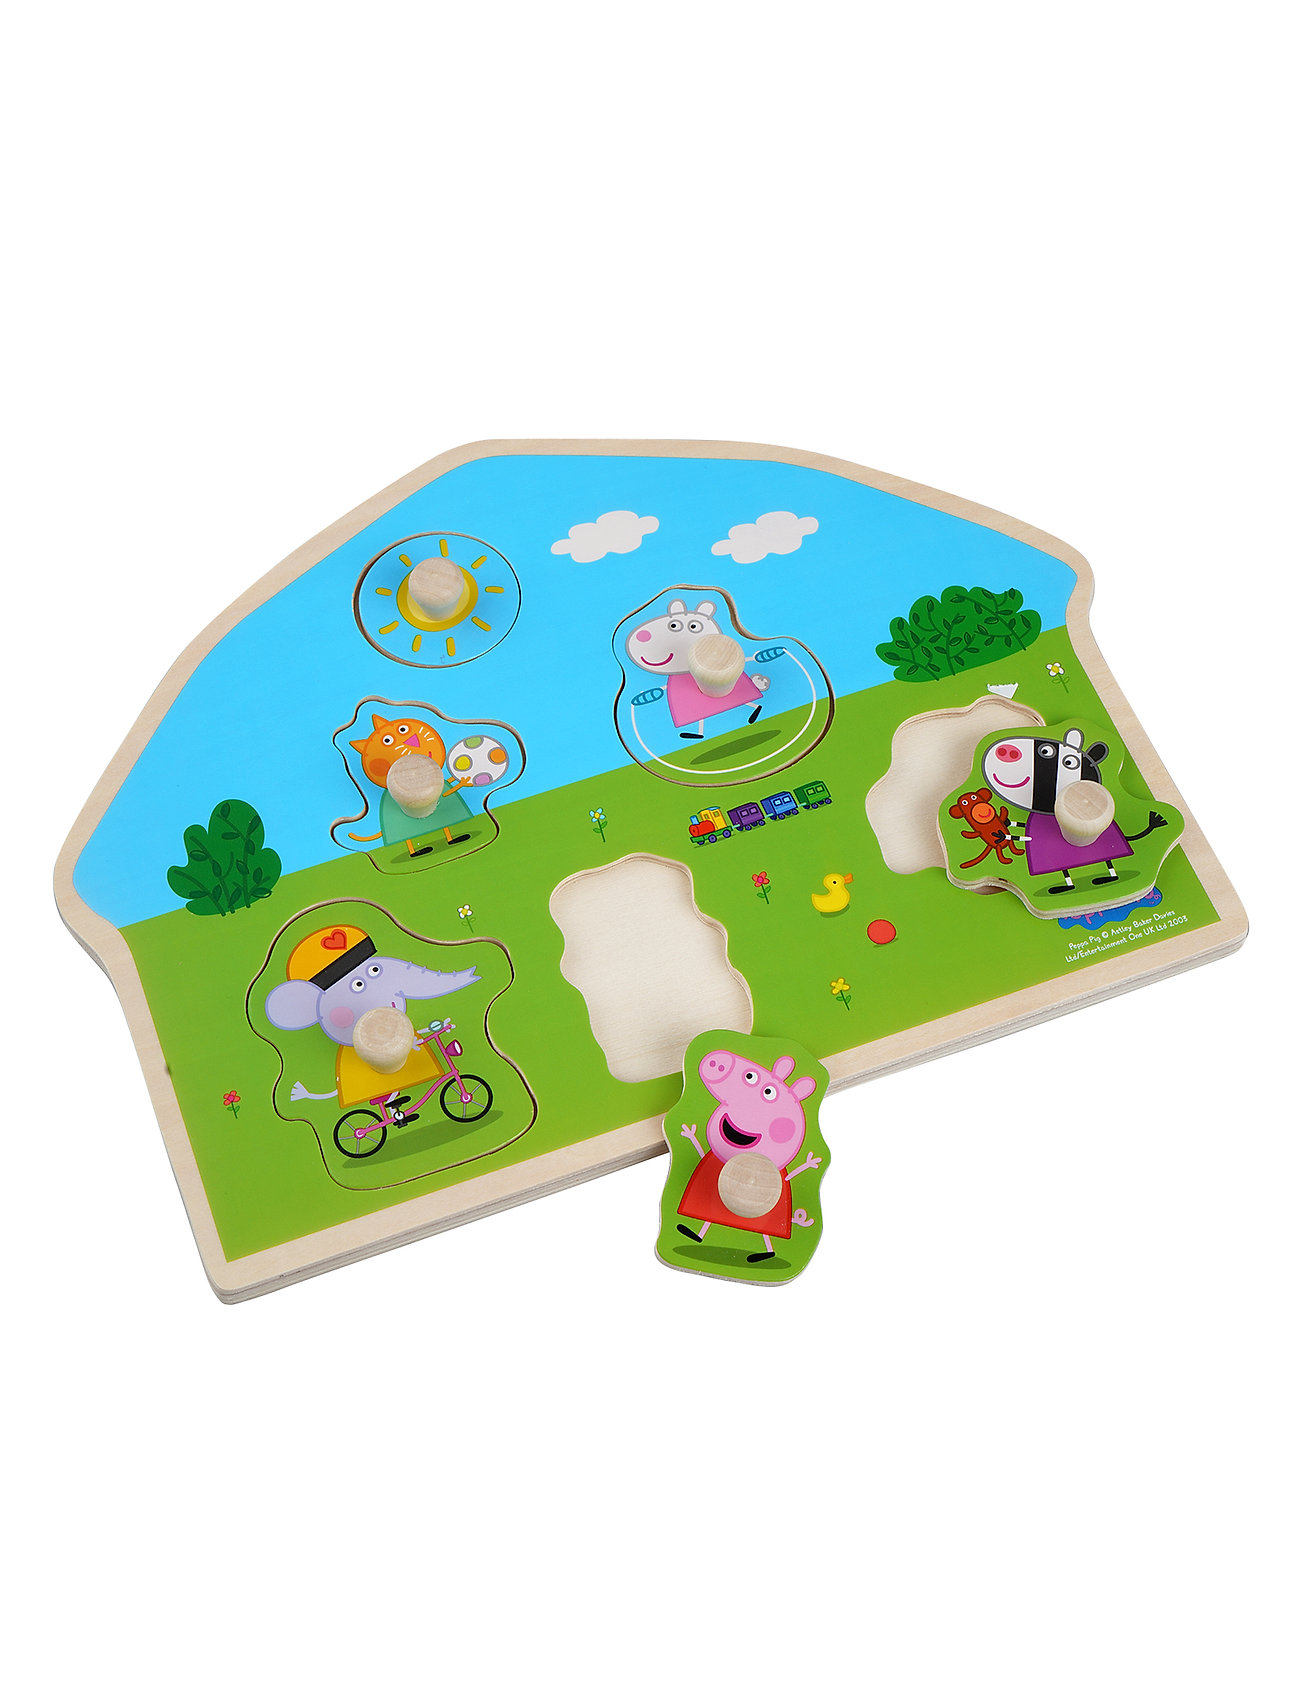 Peppa Pig Wooden Knob Puzzle Playground Toys Puzzles And Games Puzzles Pegged Puzzles Multi/patterned Gurli Gris